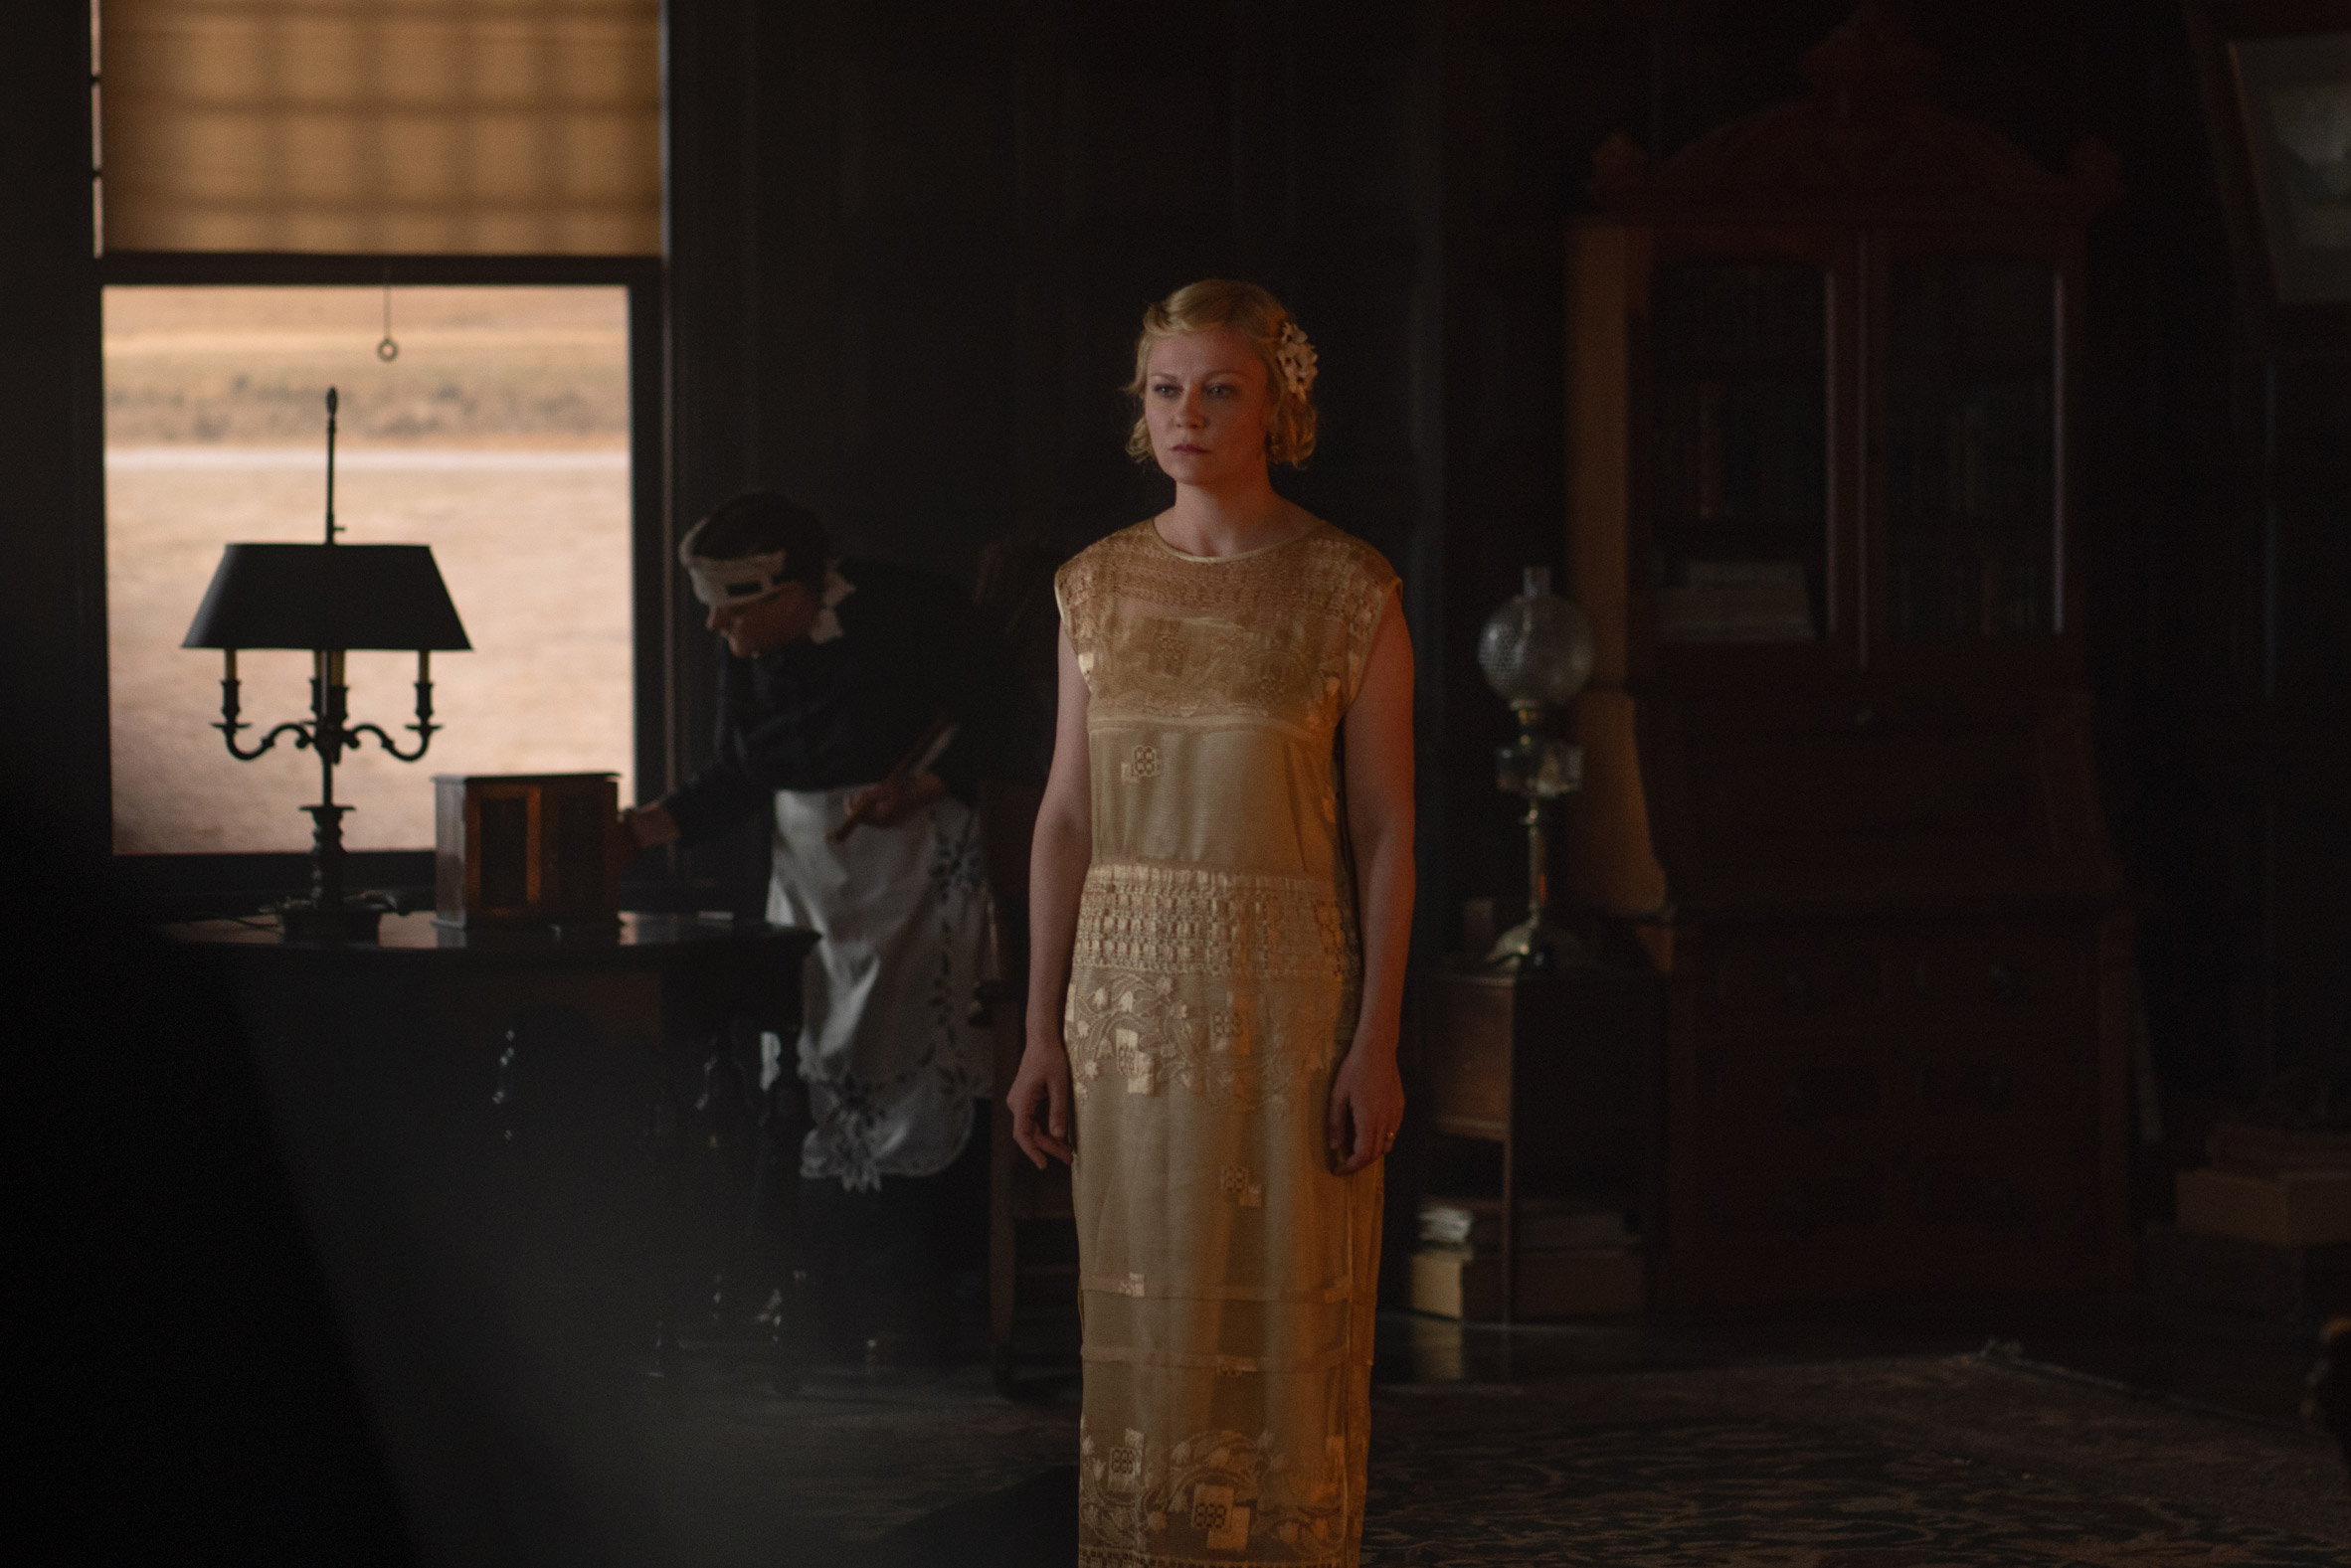 Dark interior of house in the Power of the Dog with Kirsten Dunst